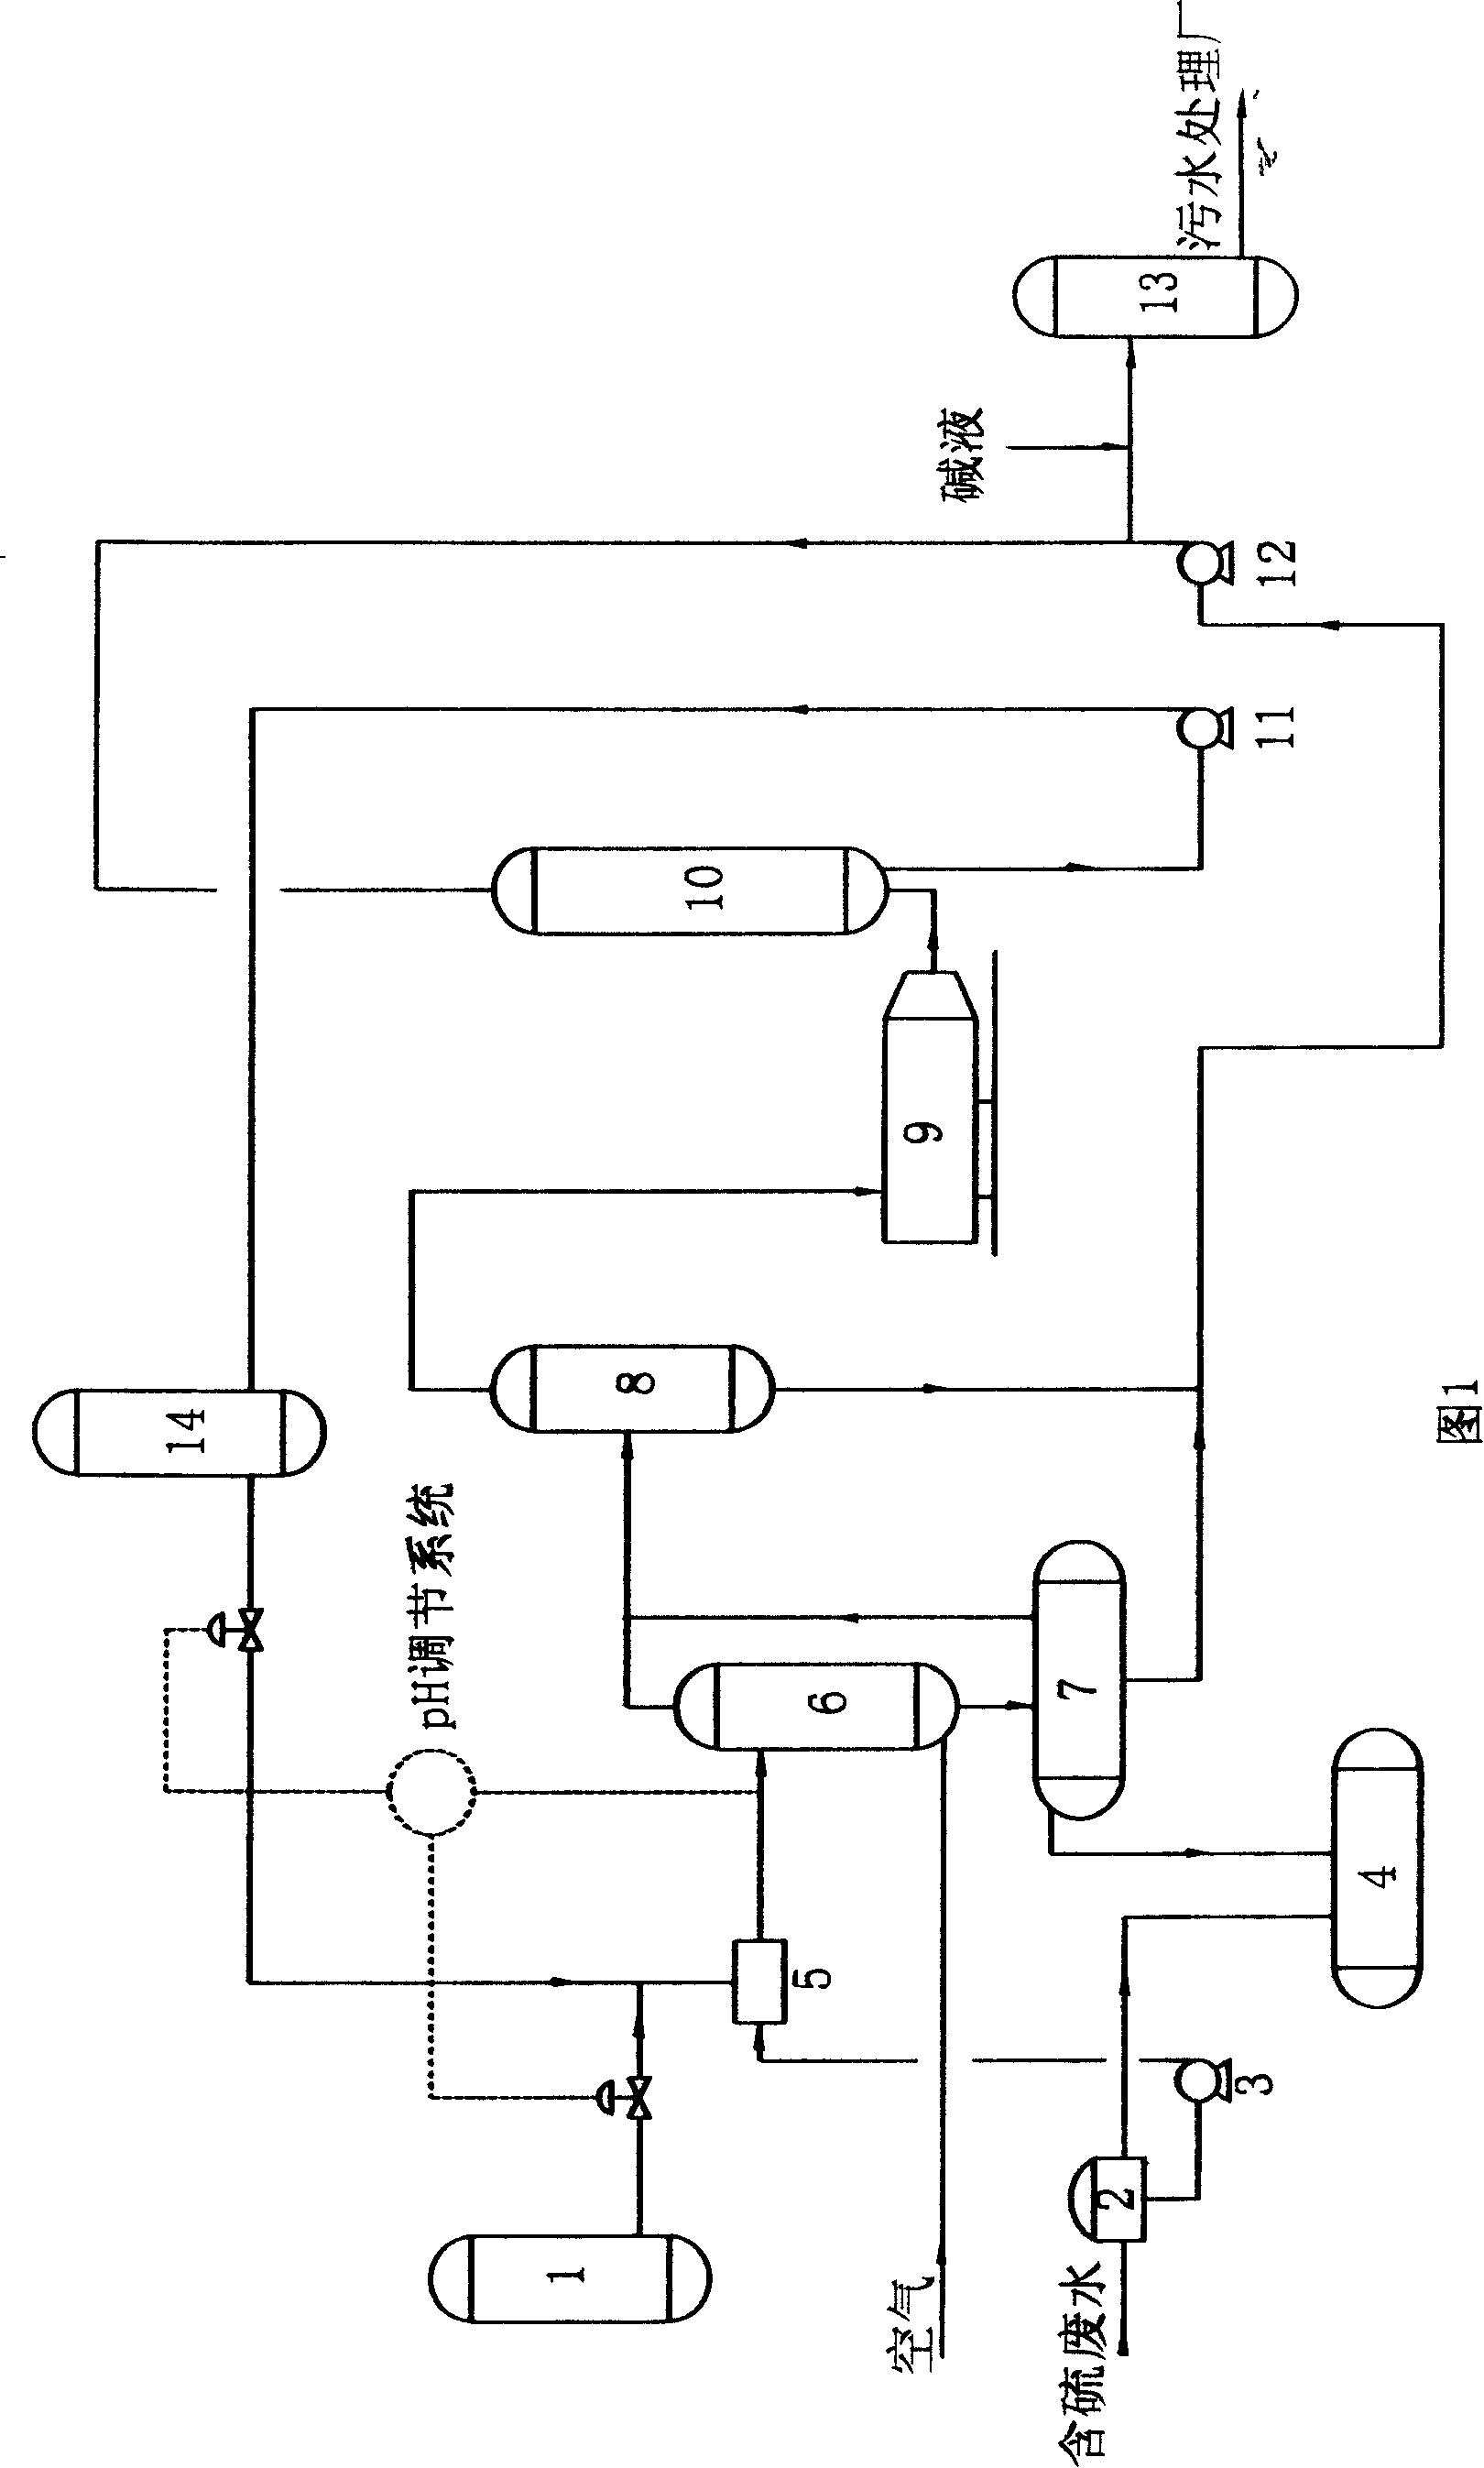 Method for treating sulfur-containing waste water